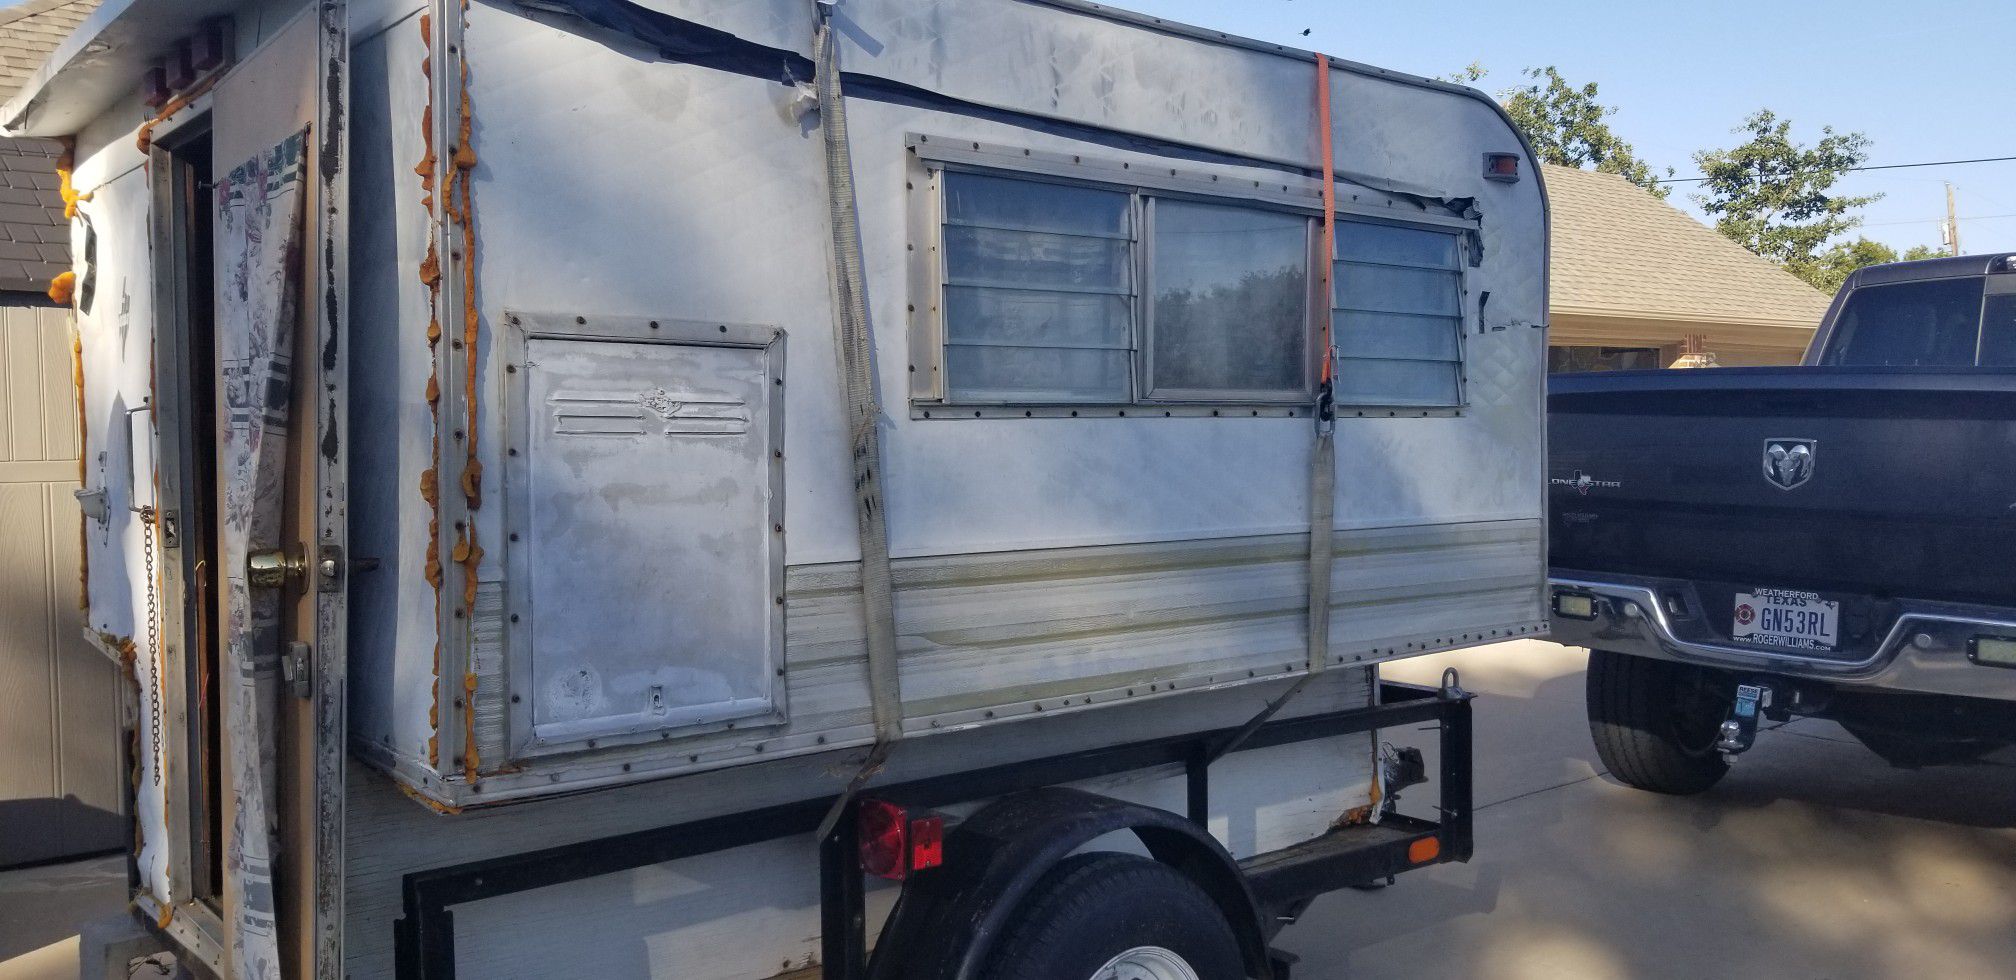 FREE Hunting camper with trailer purchase